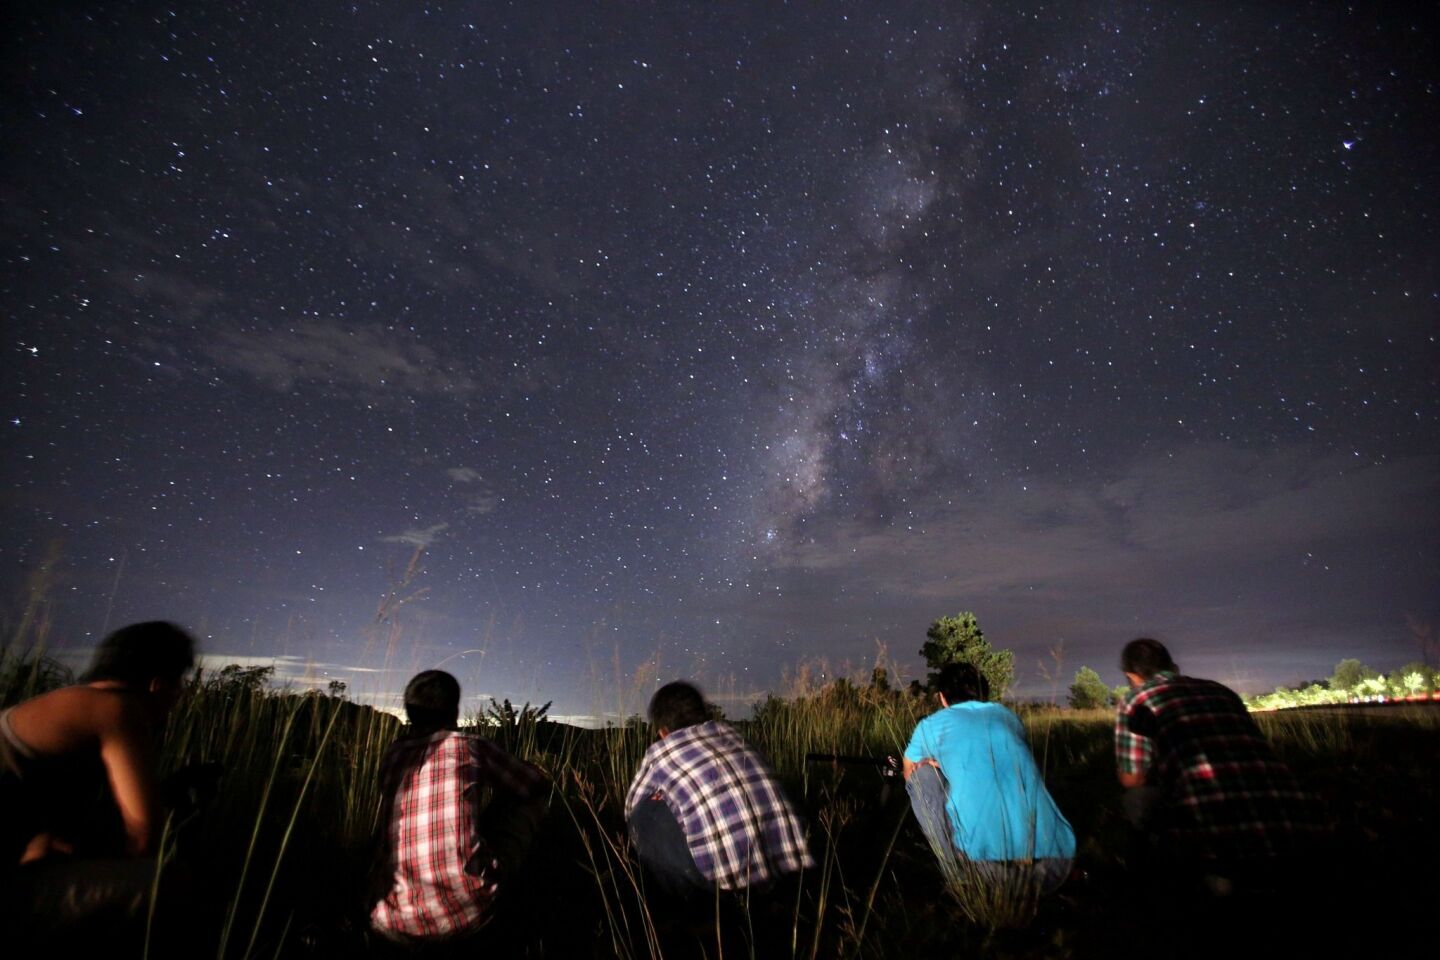 A time-exposure photograph of people watching for the Perseid meteor shower in the night sky near Yangon.